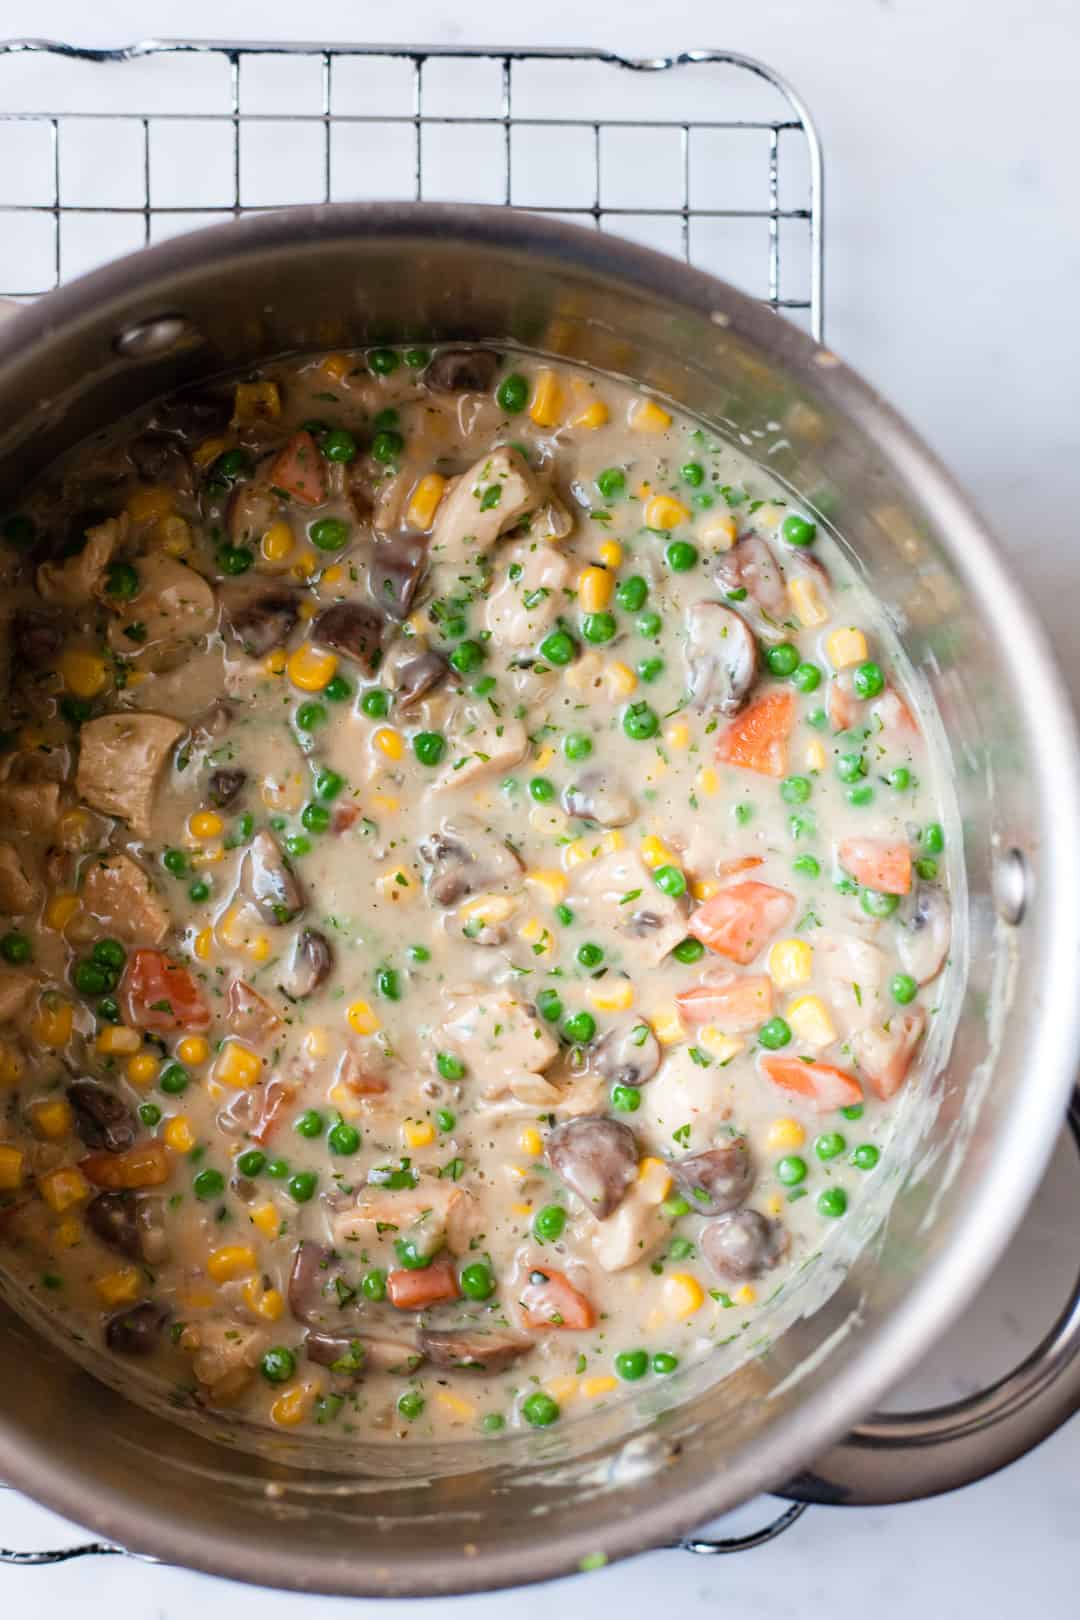 Chicken pie filling with vegetables.